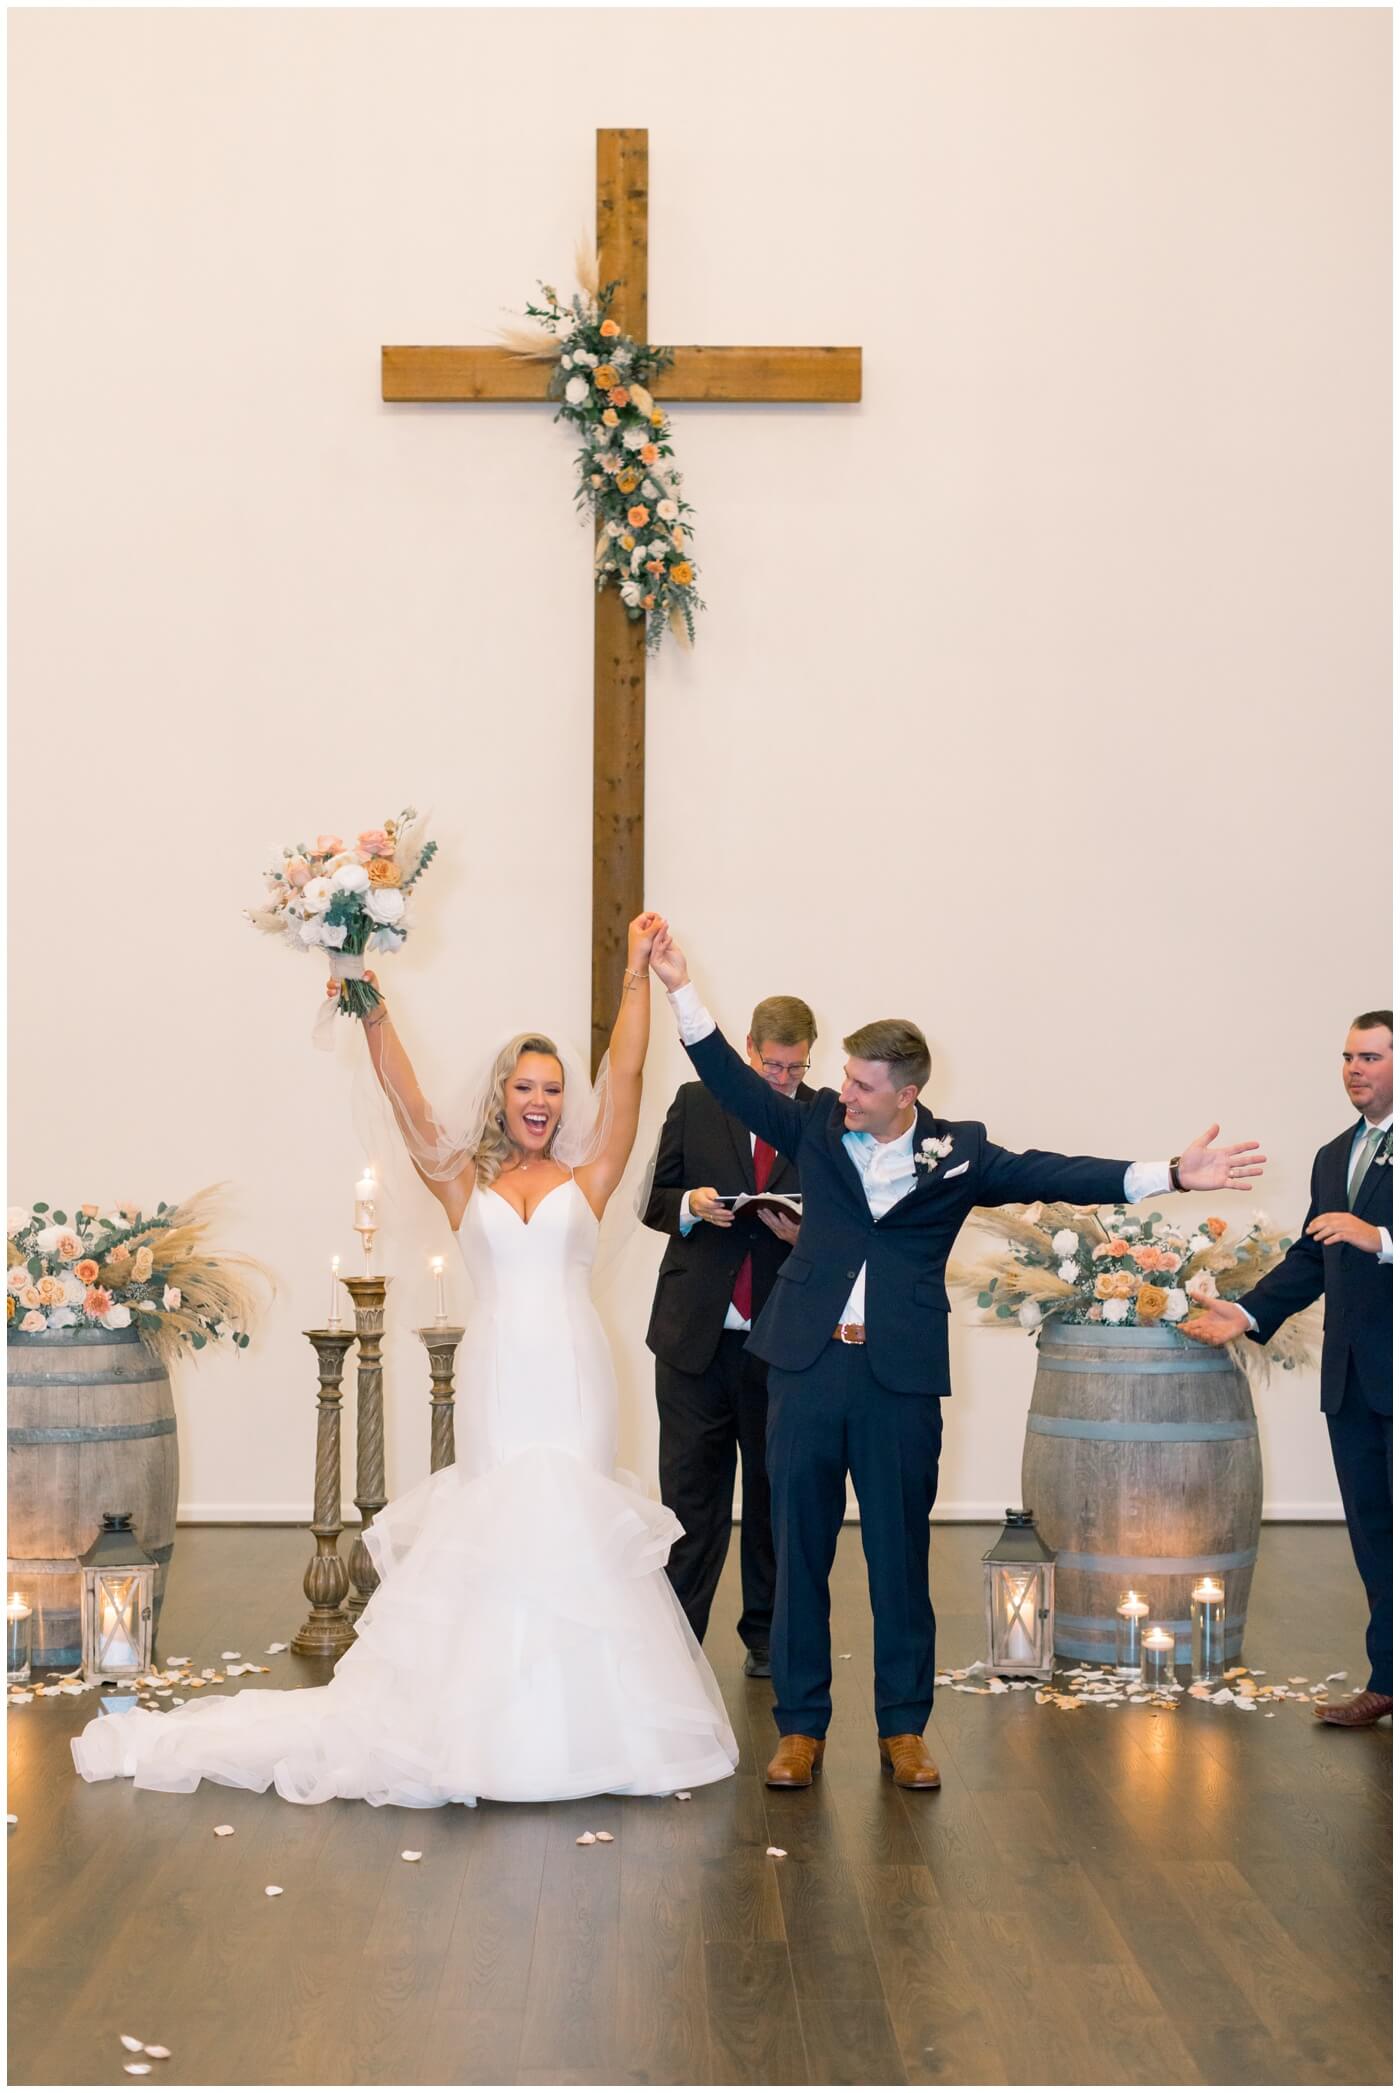 Houston Wedding at The Vine | the bride and groom celebrate after their wedding 